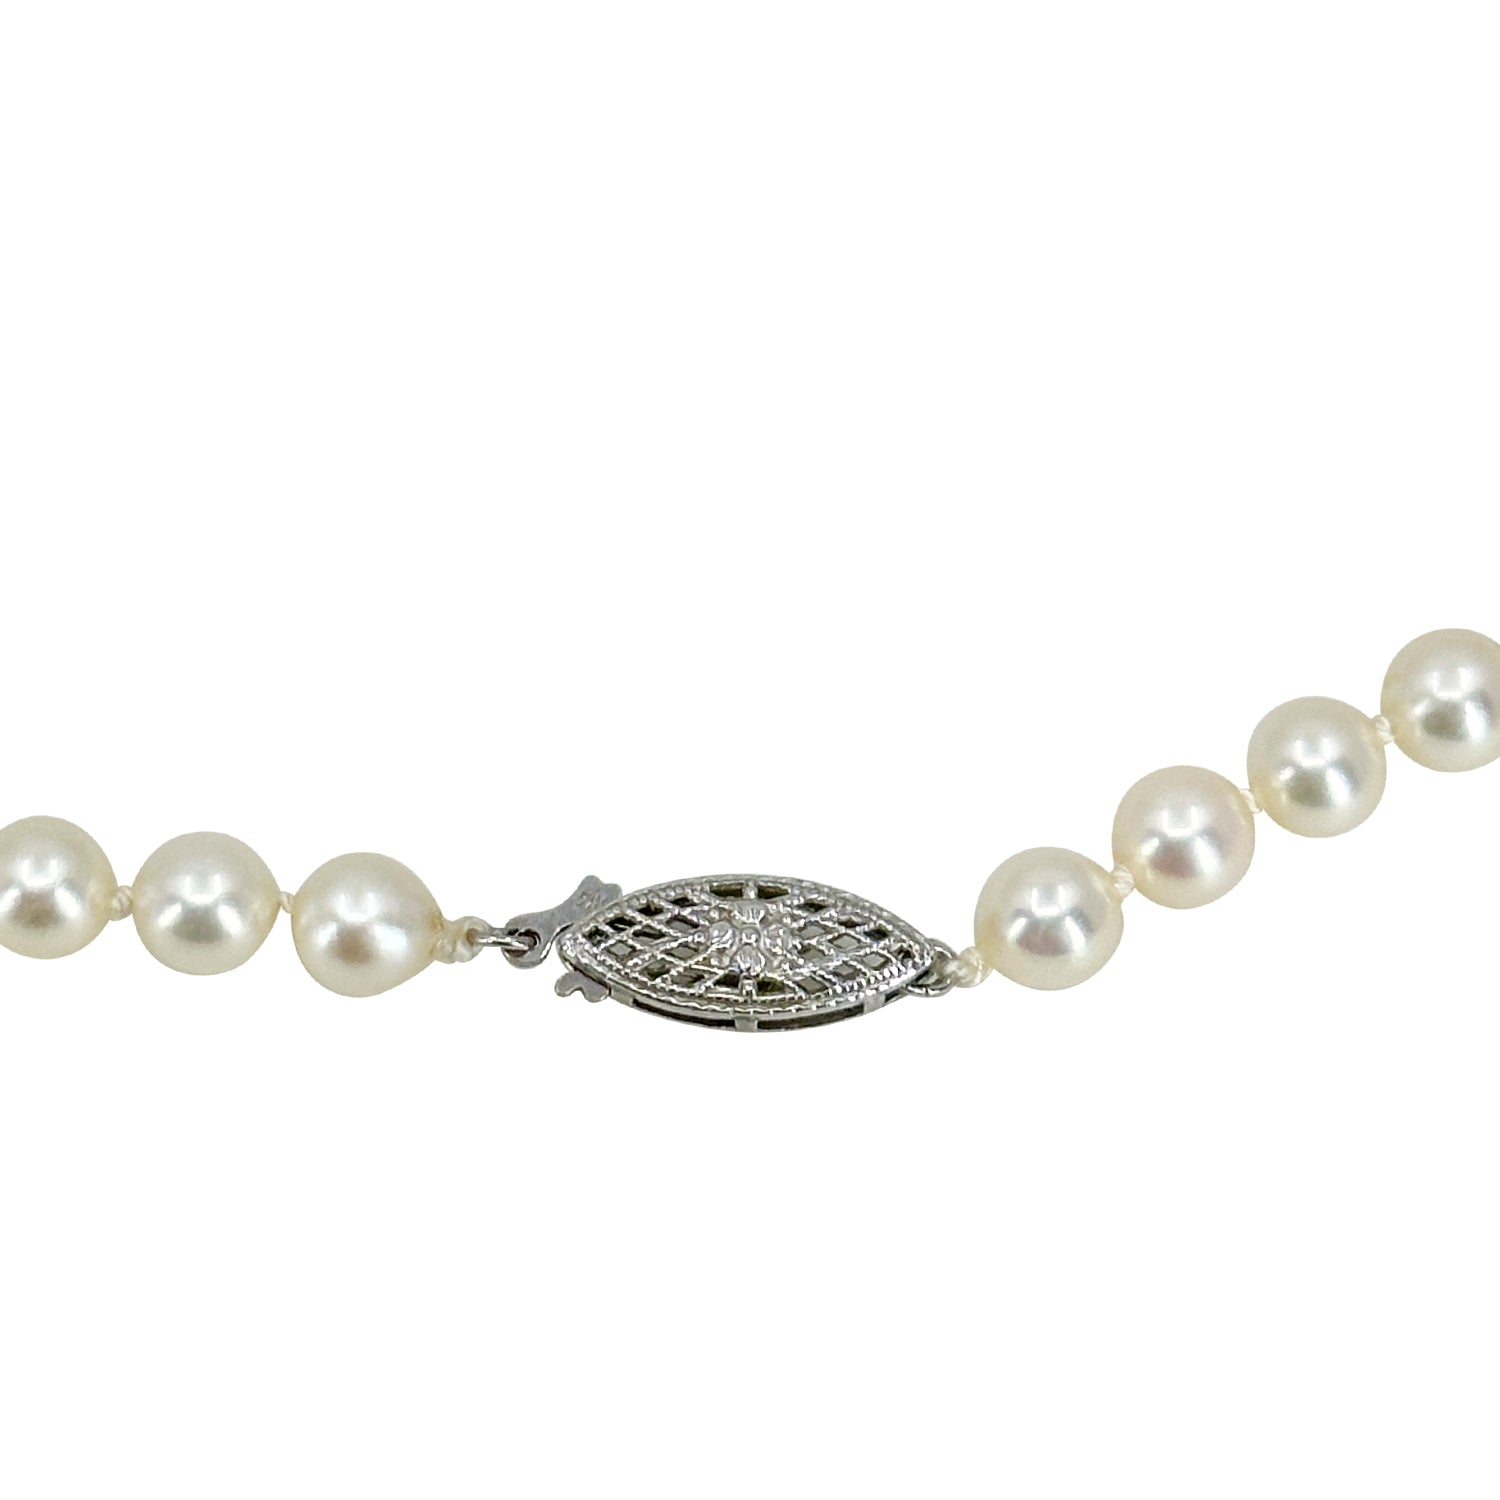 Mid-Century Filigree Japanese Saltwater Cultured Akoya Pearl Vintage Necklace Strand - 14K White Gold 16.75 Inch